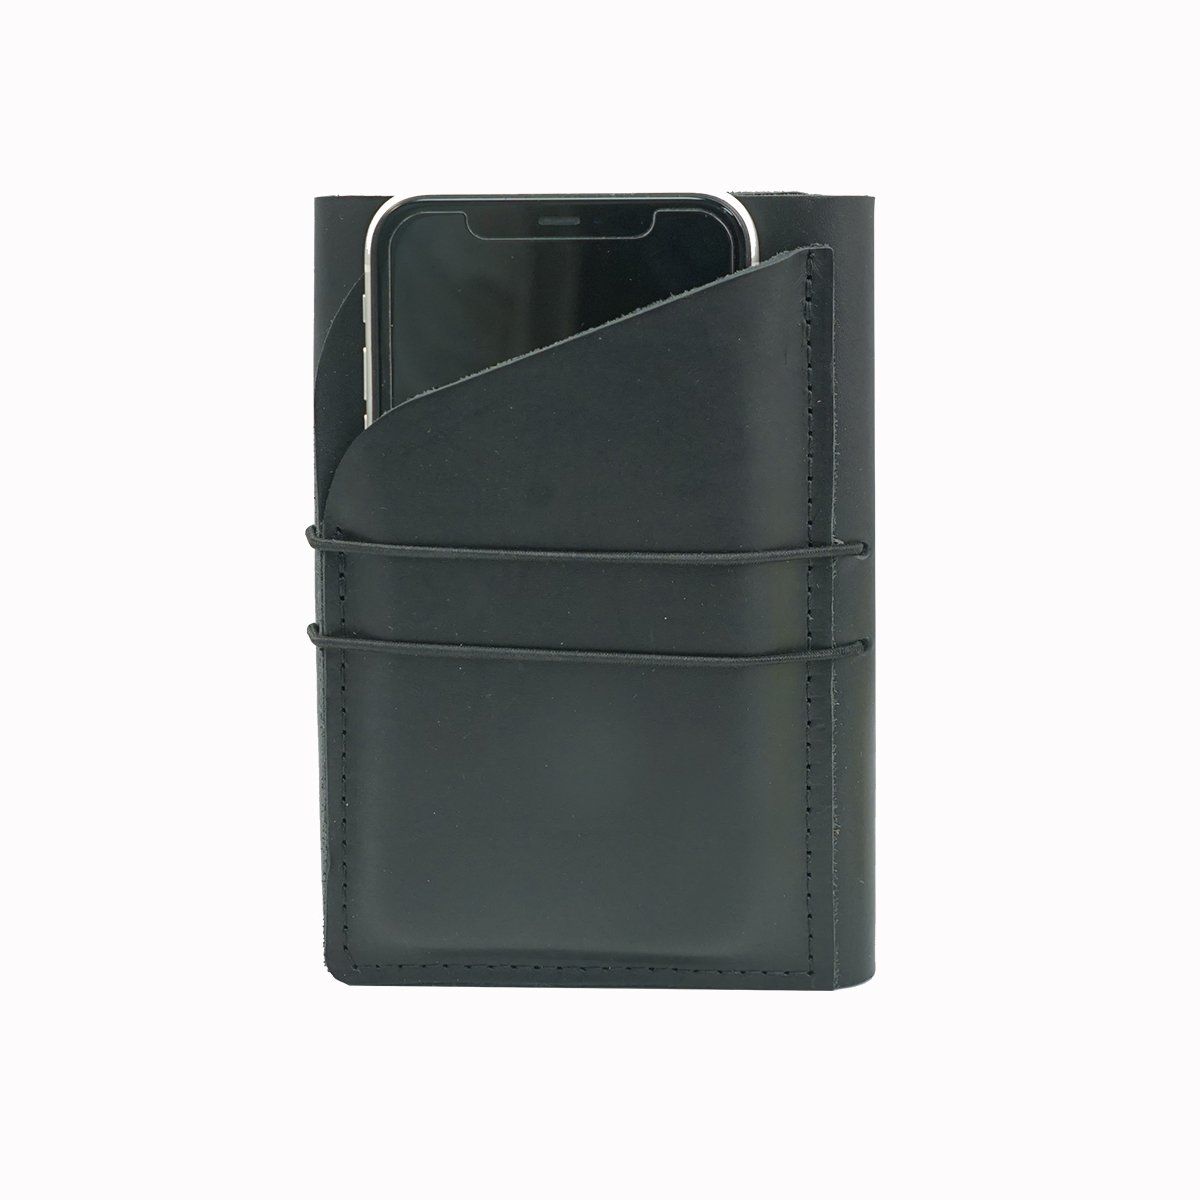 Moleskine Classic Pocket Leather Notebook Cover – 3.5” x 5.5”